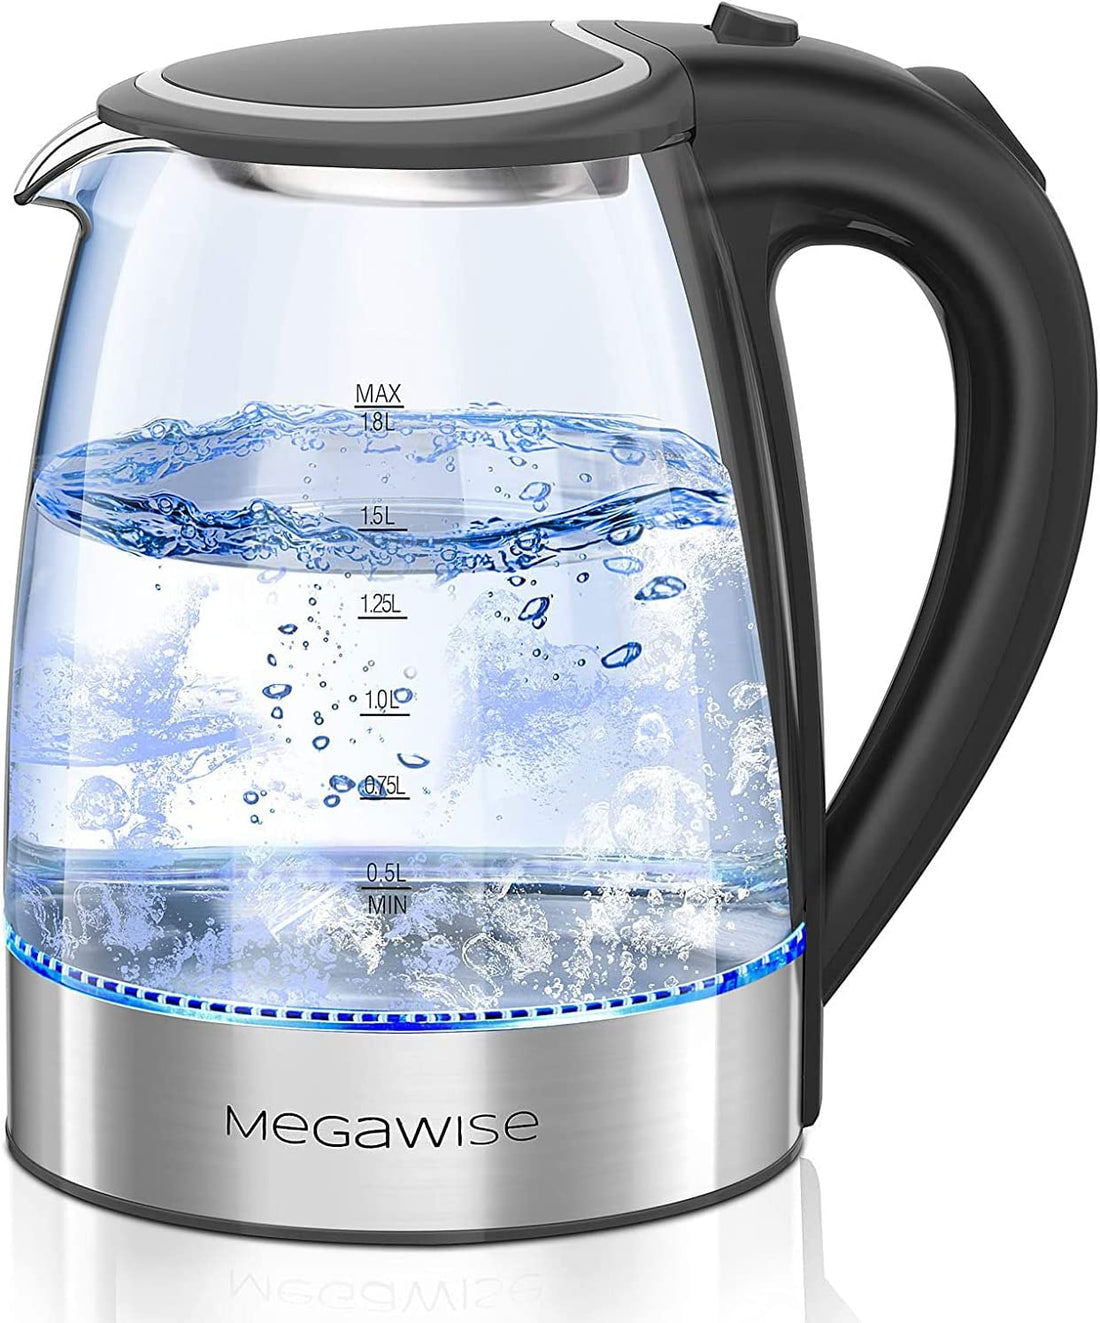 MegaWise 1500W Electric Kettle, 1.8L Borosilicate Glass Tea Kettle with LED Light, Auto Shut-Off and Boil-Dry Protection Cordless Kettle Fast Boiling $30.39